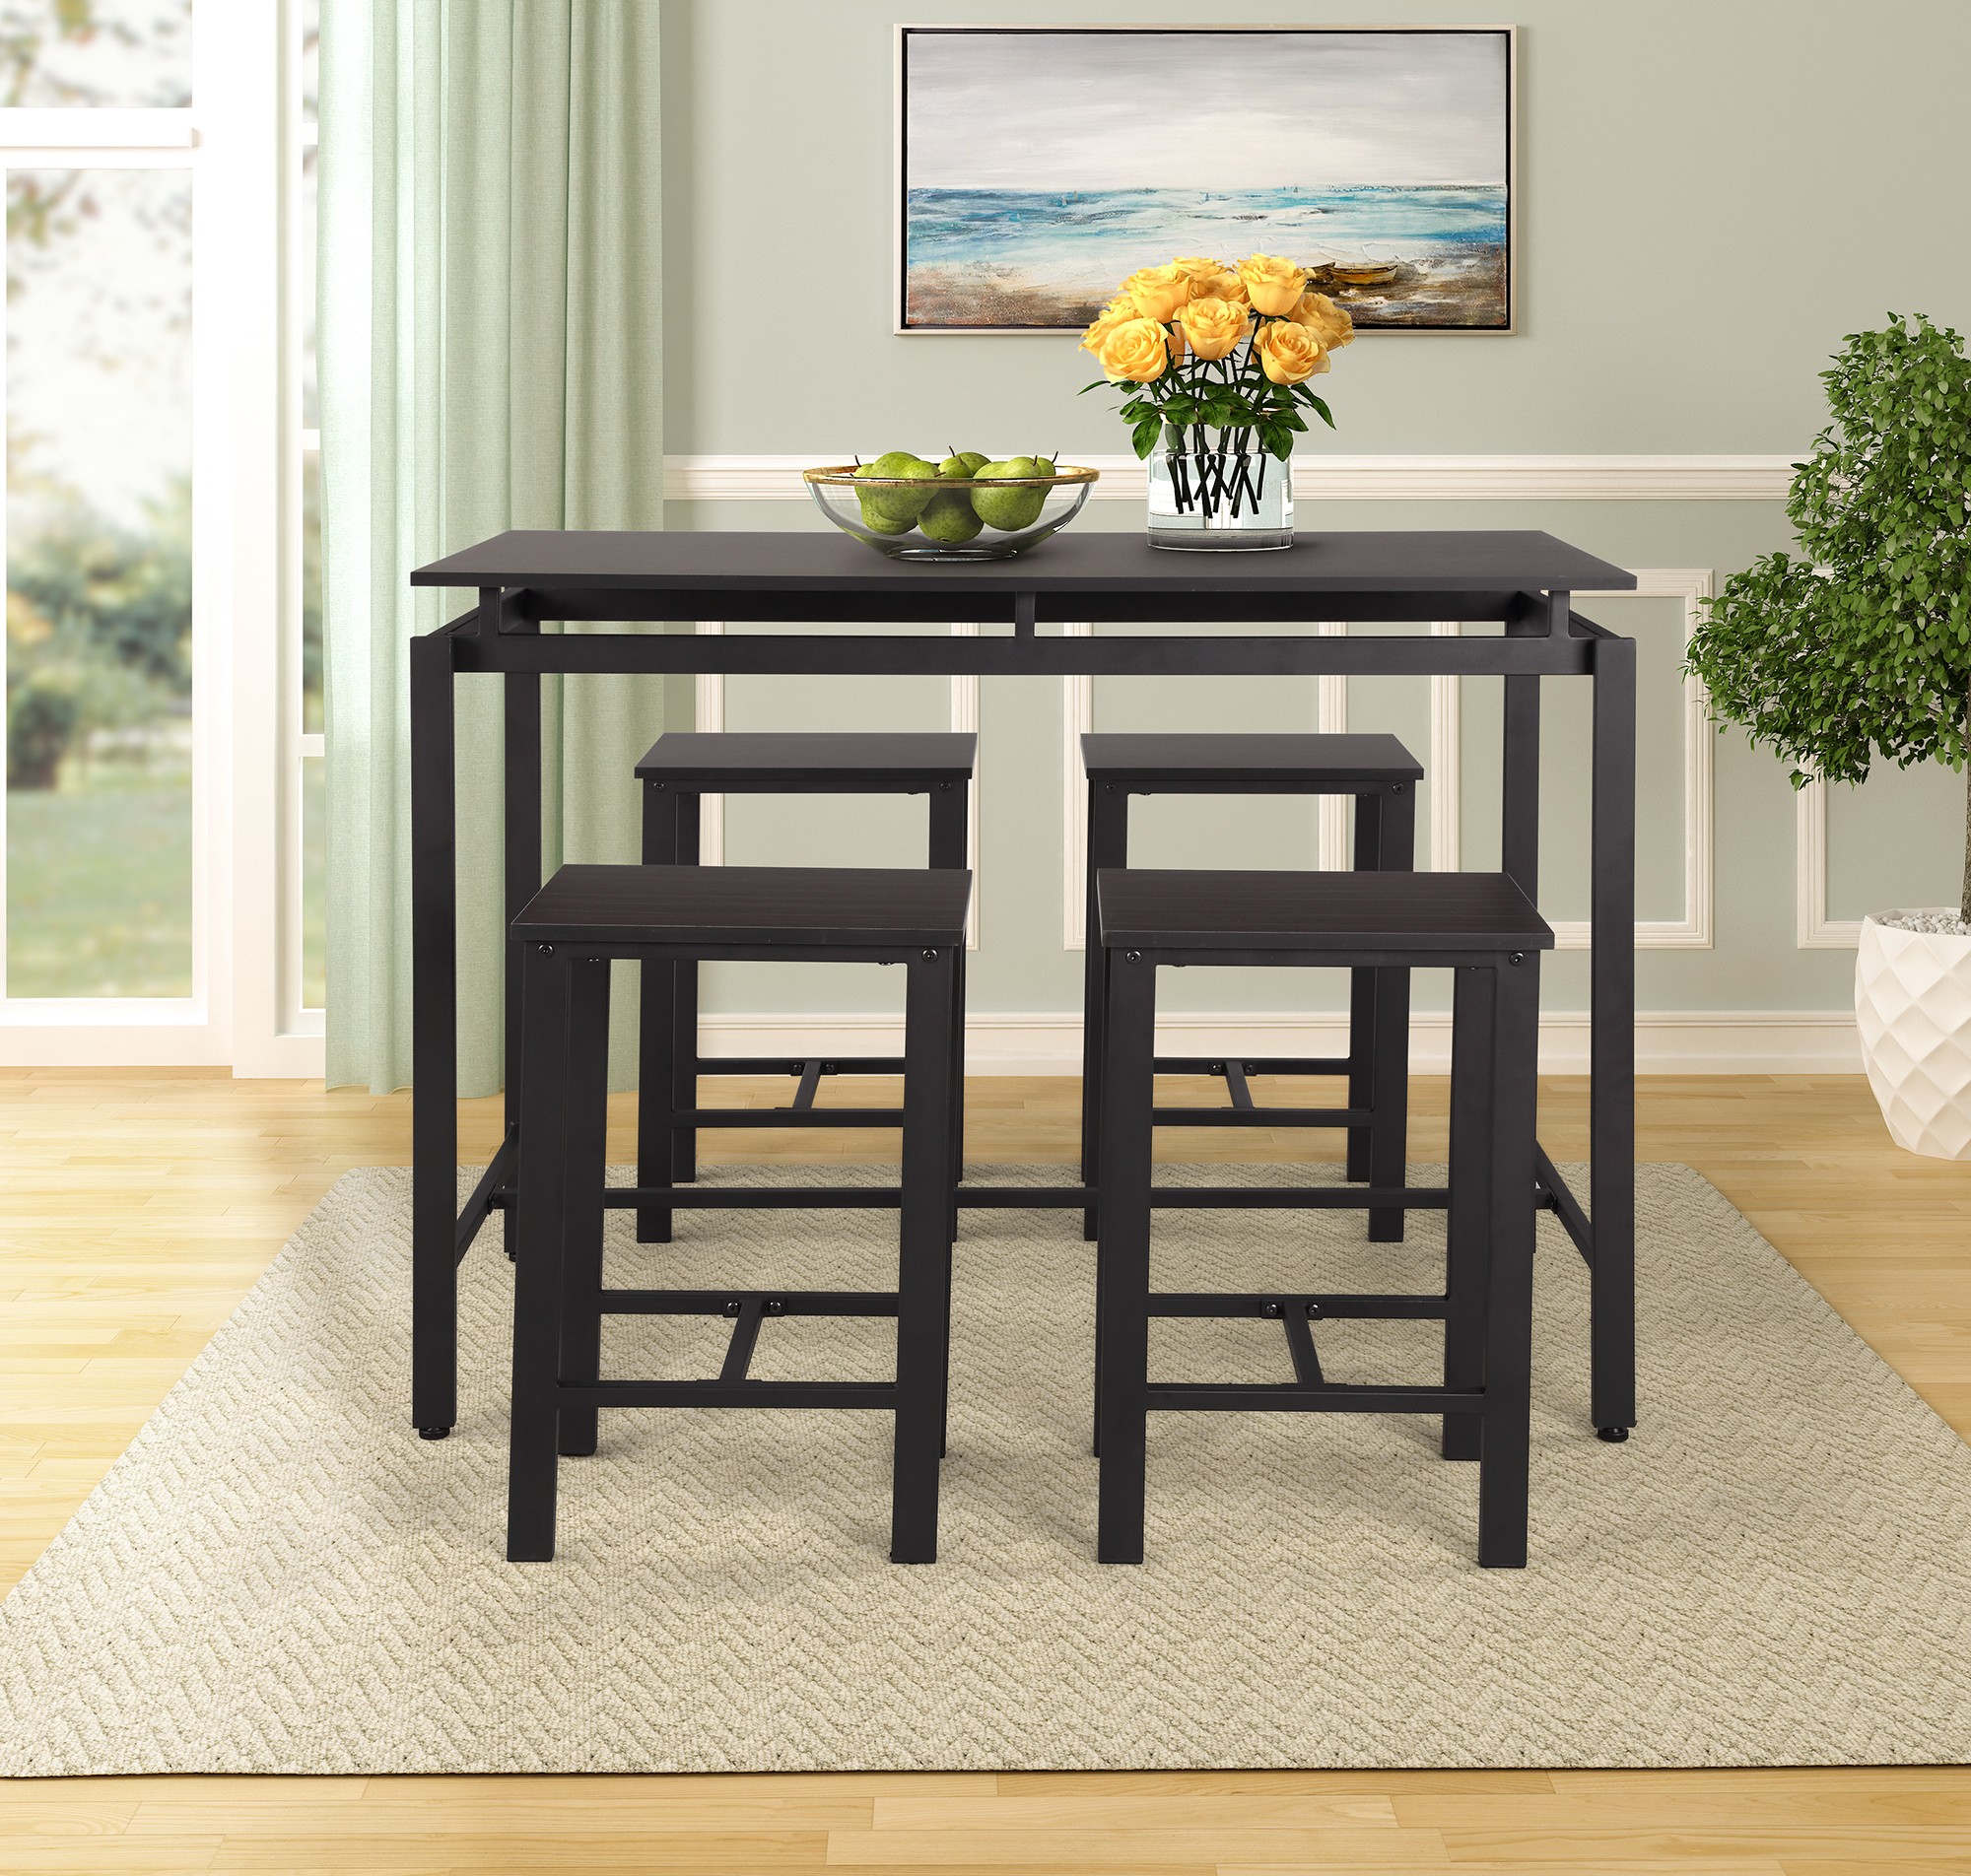 Enyopro dining table set for 4 people 5 piece bar